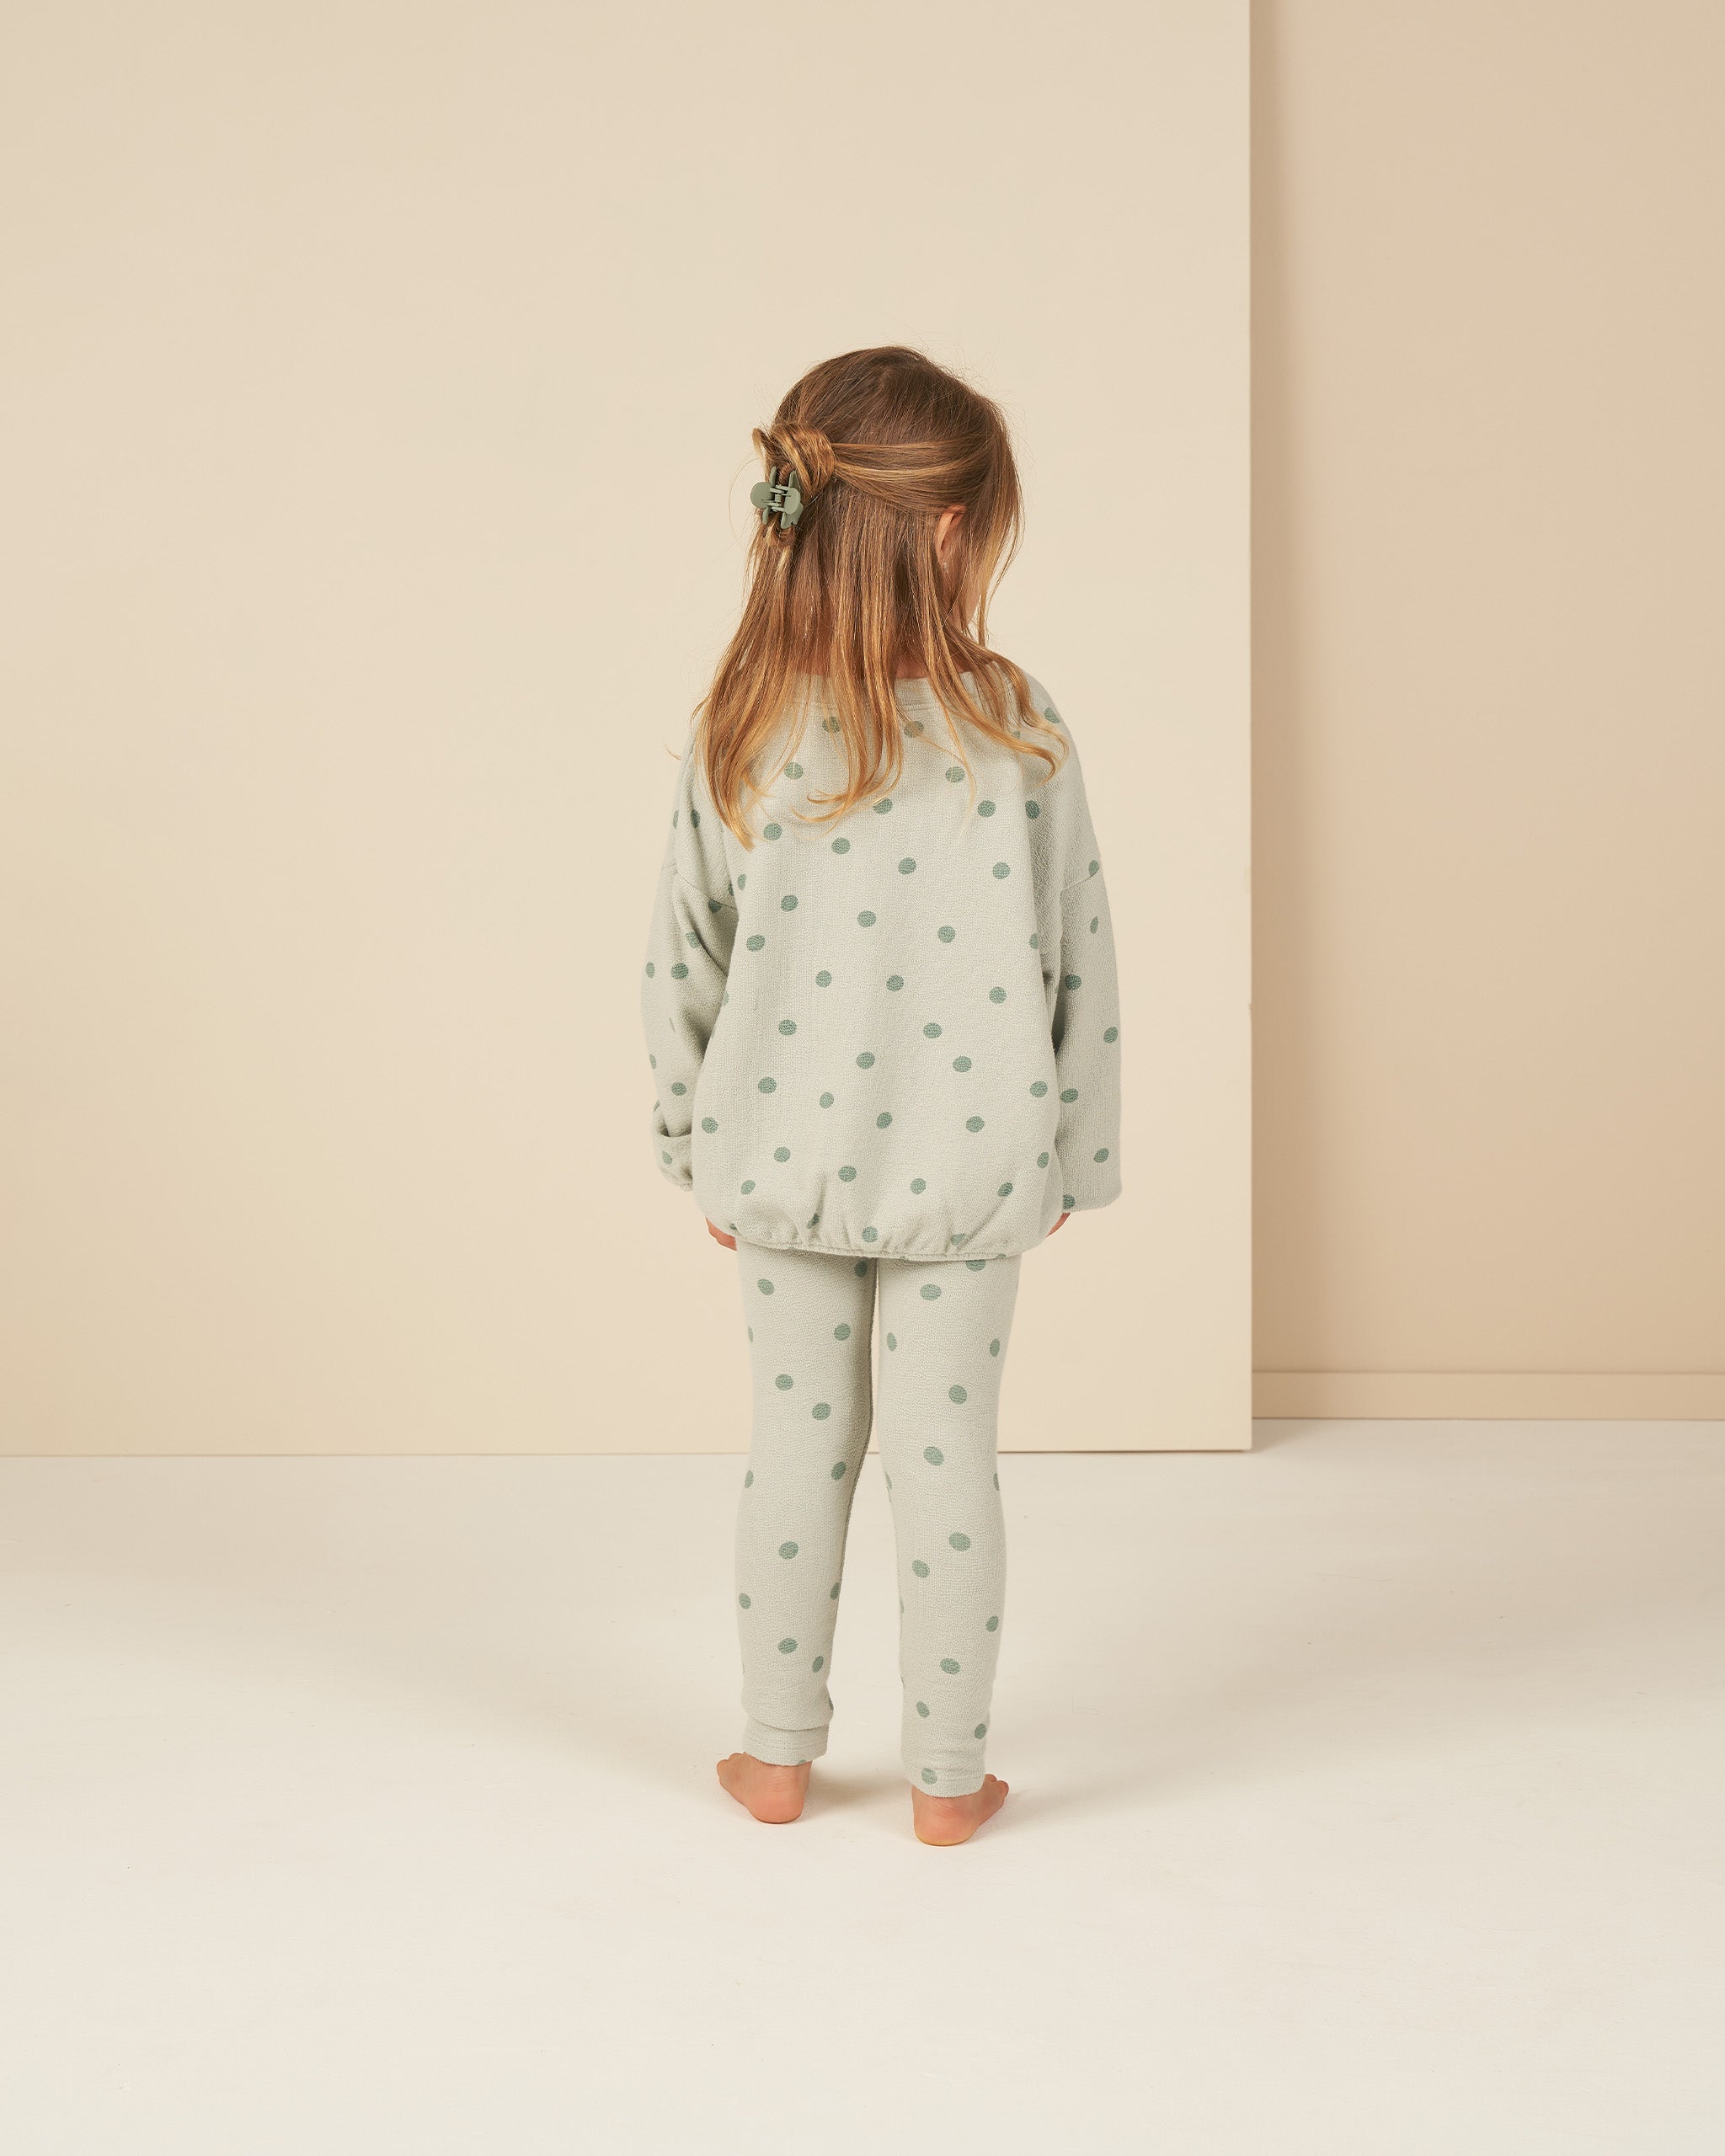 Spongy Knit Set || Polka Dot - Rylee + Cru | Kids Clothes | Trendy Baby Clothes | Modern Infant Outfits |